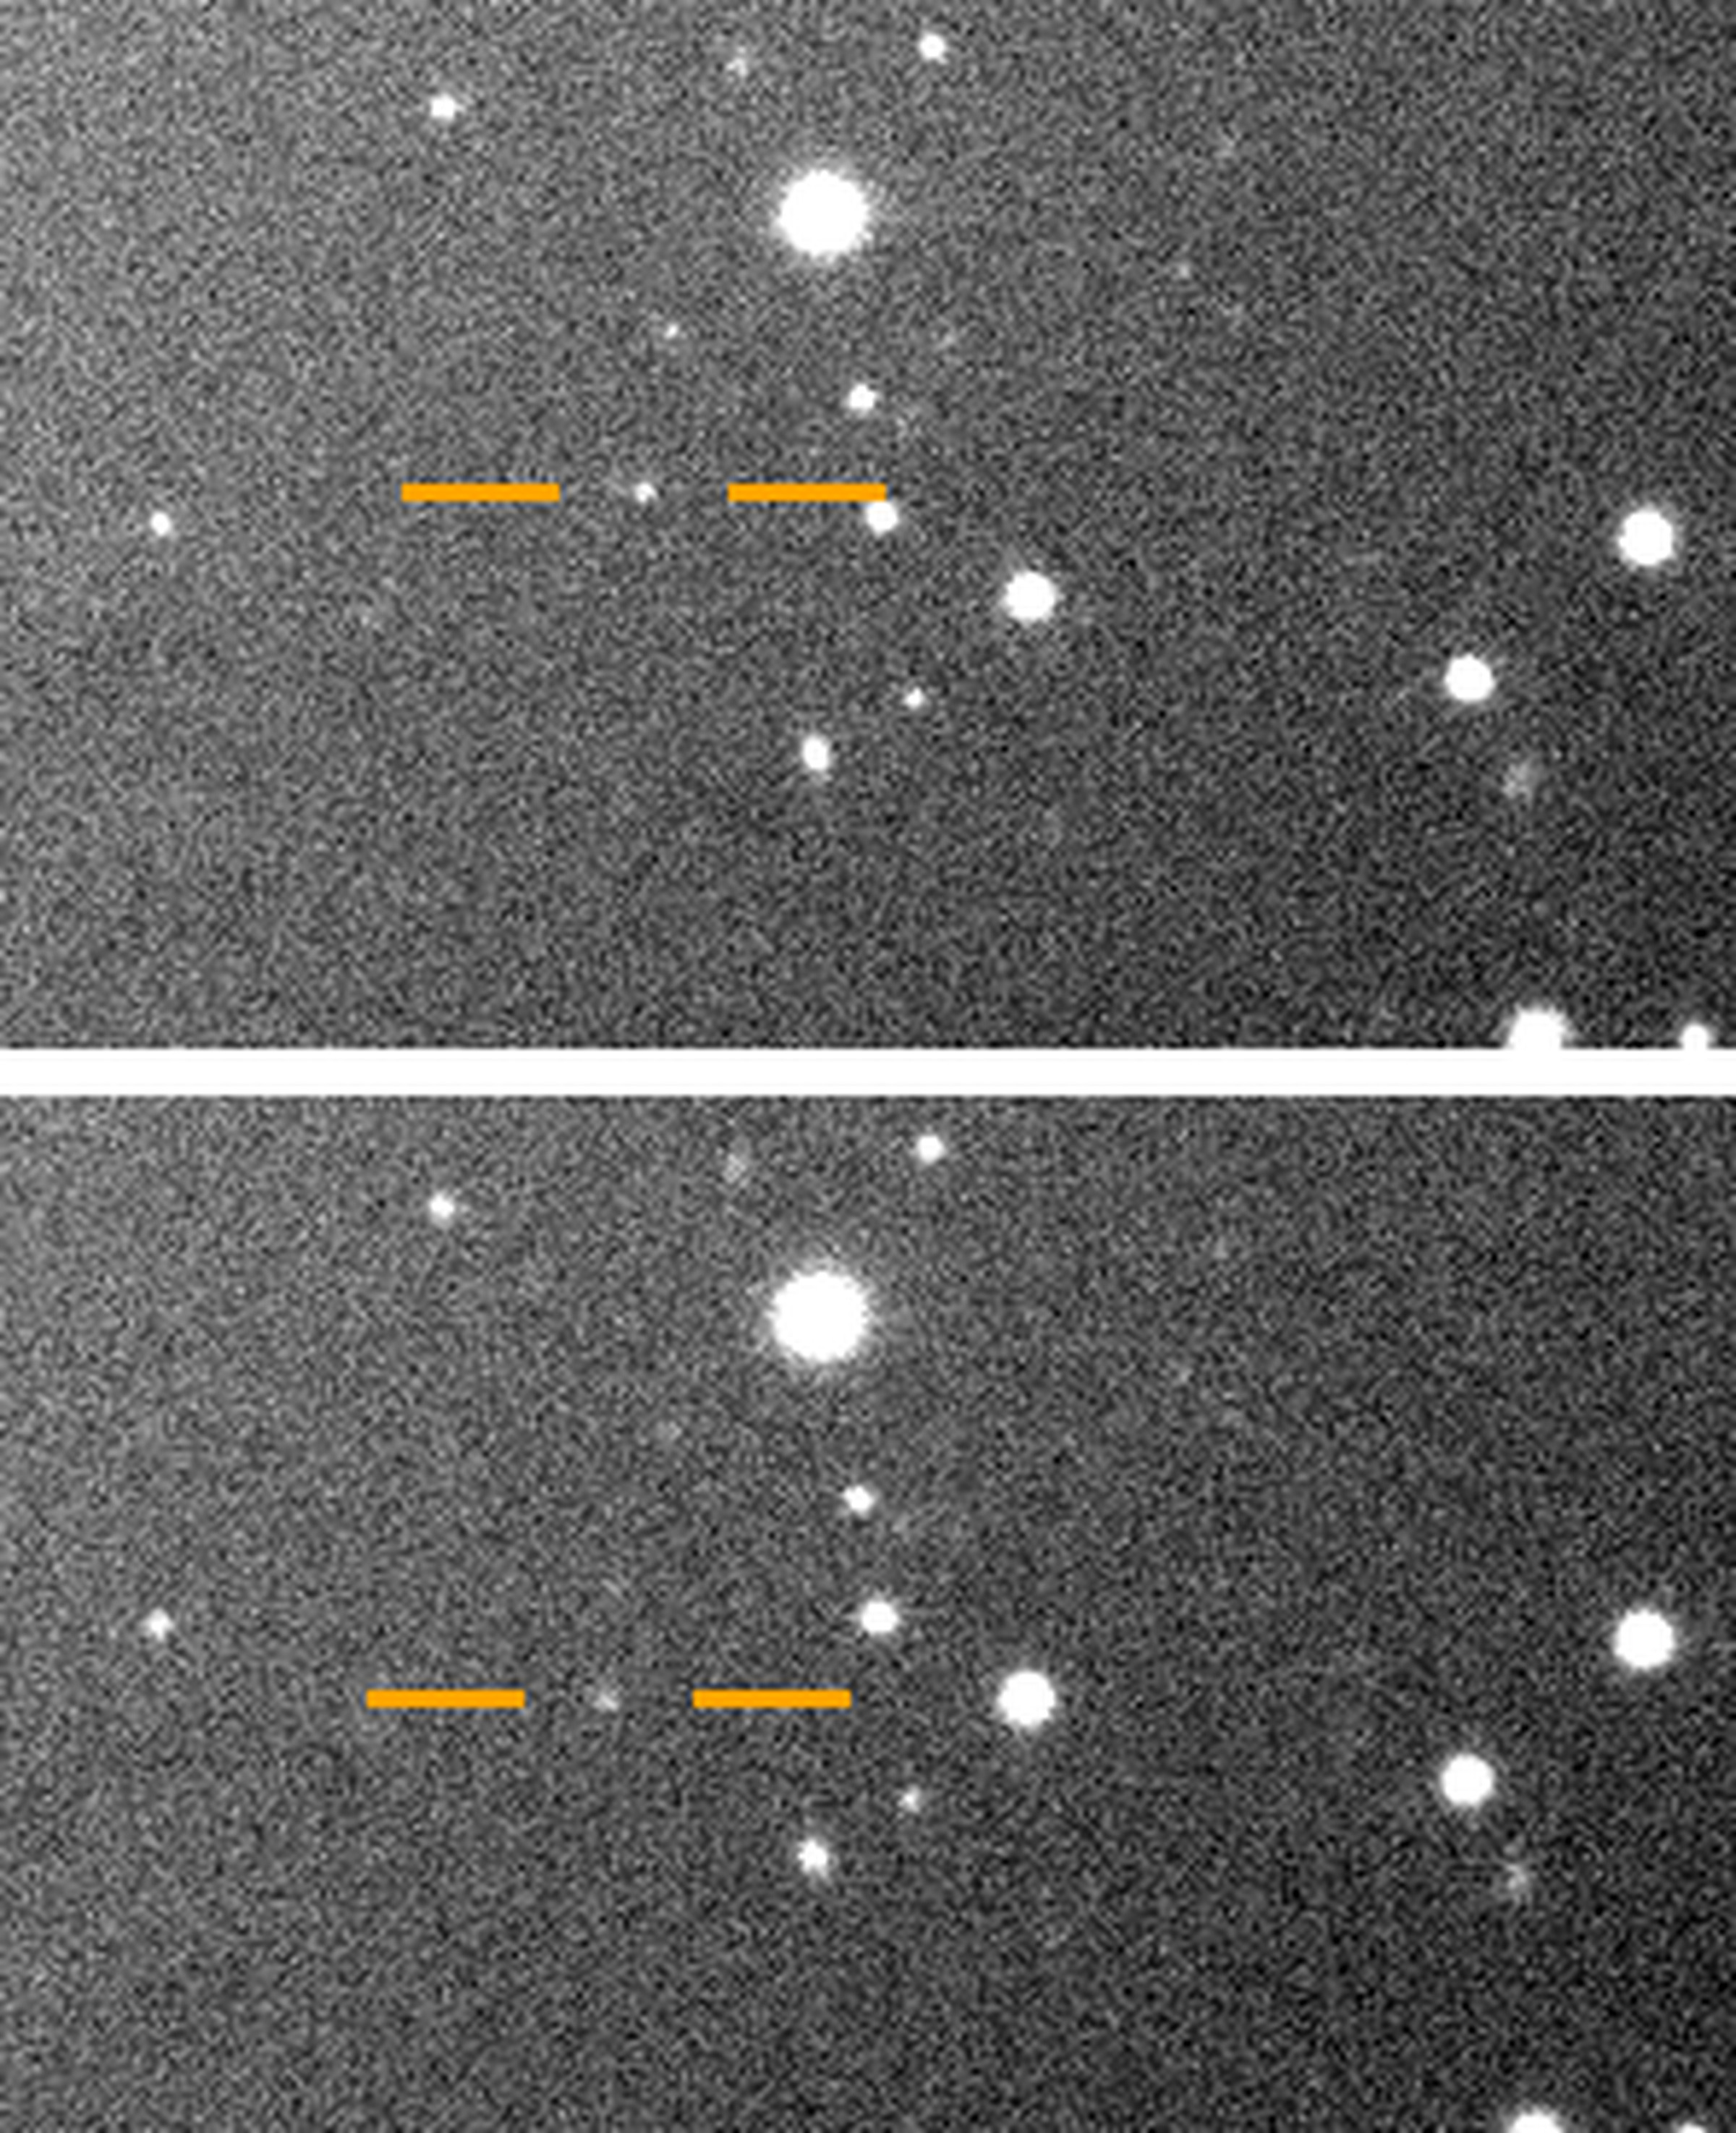 Images of Valetudo from the Magellan telescope in May 2018.